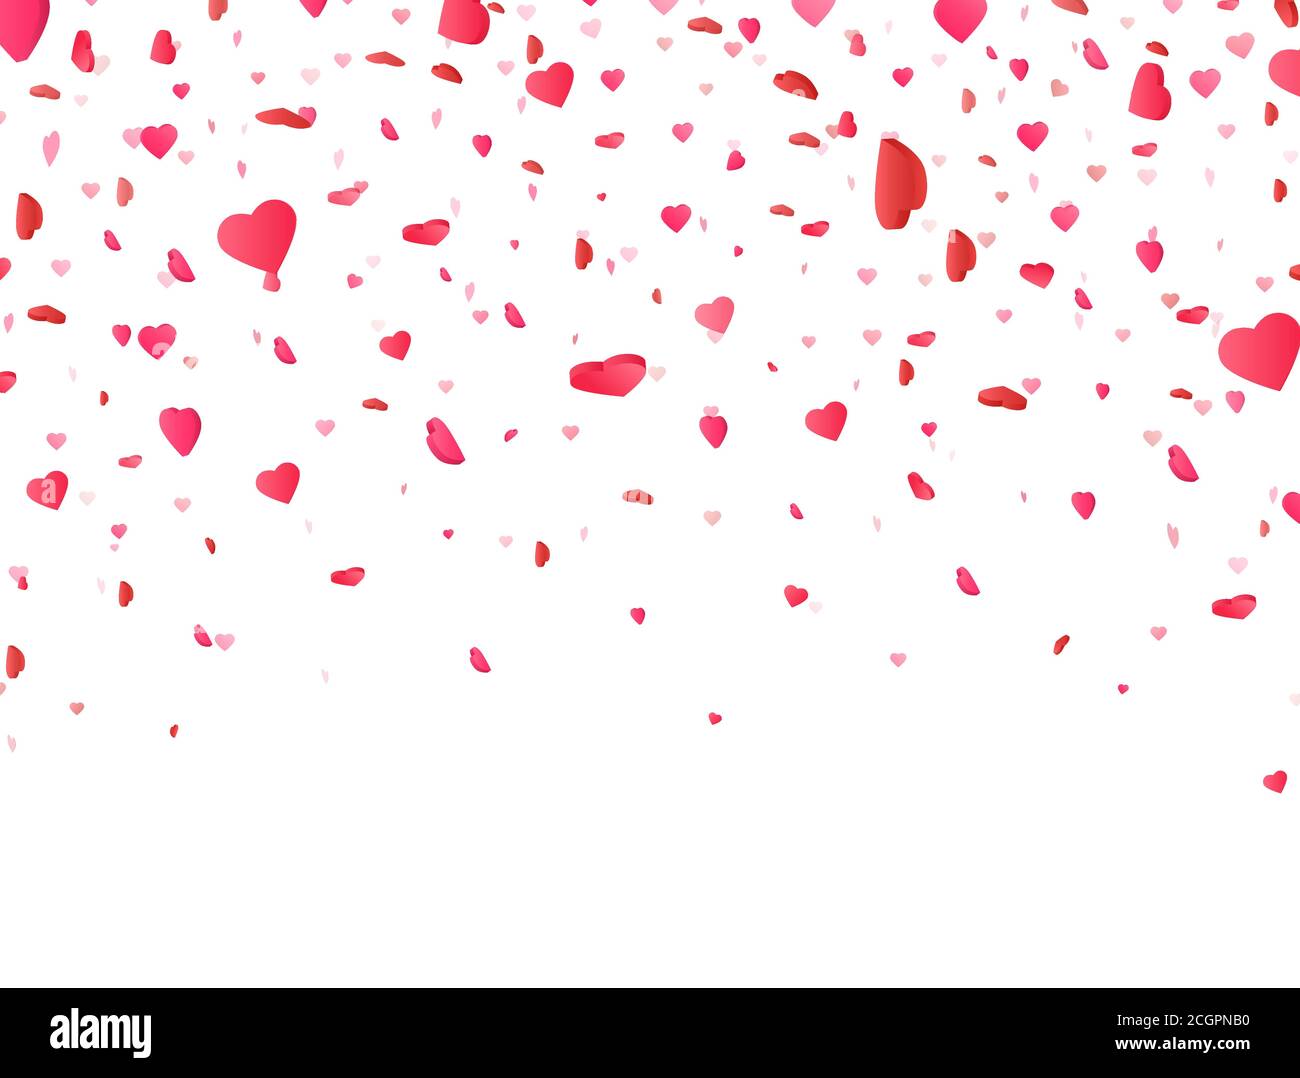 Heart confetti falling on white background. Valentines Day